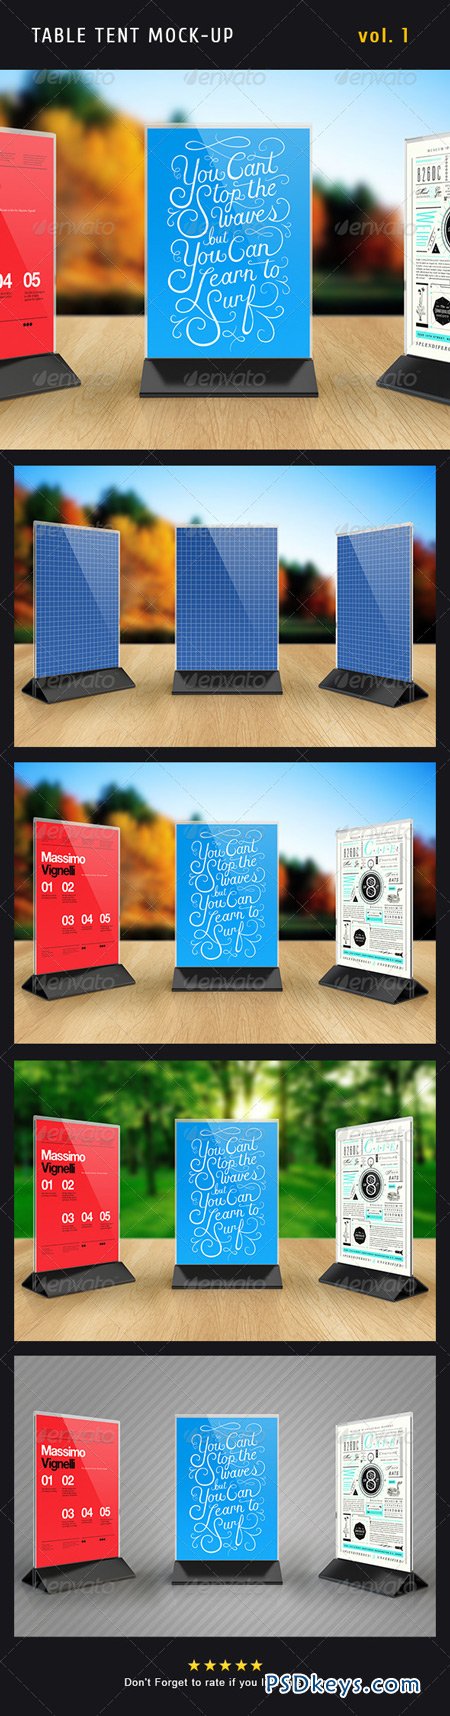 Download Table Tent Mock-up template Vol.1 5073897 » Free Download Photoshop Vector Stock image Via ...